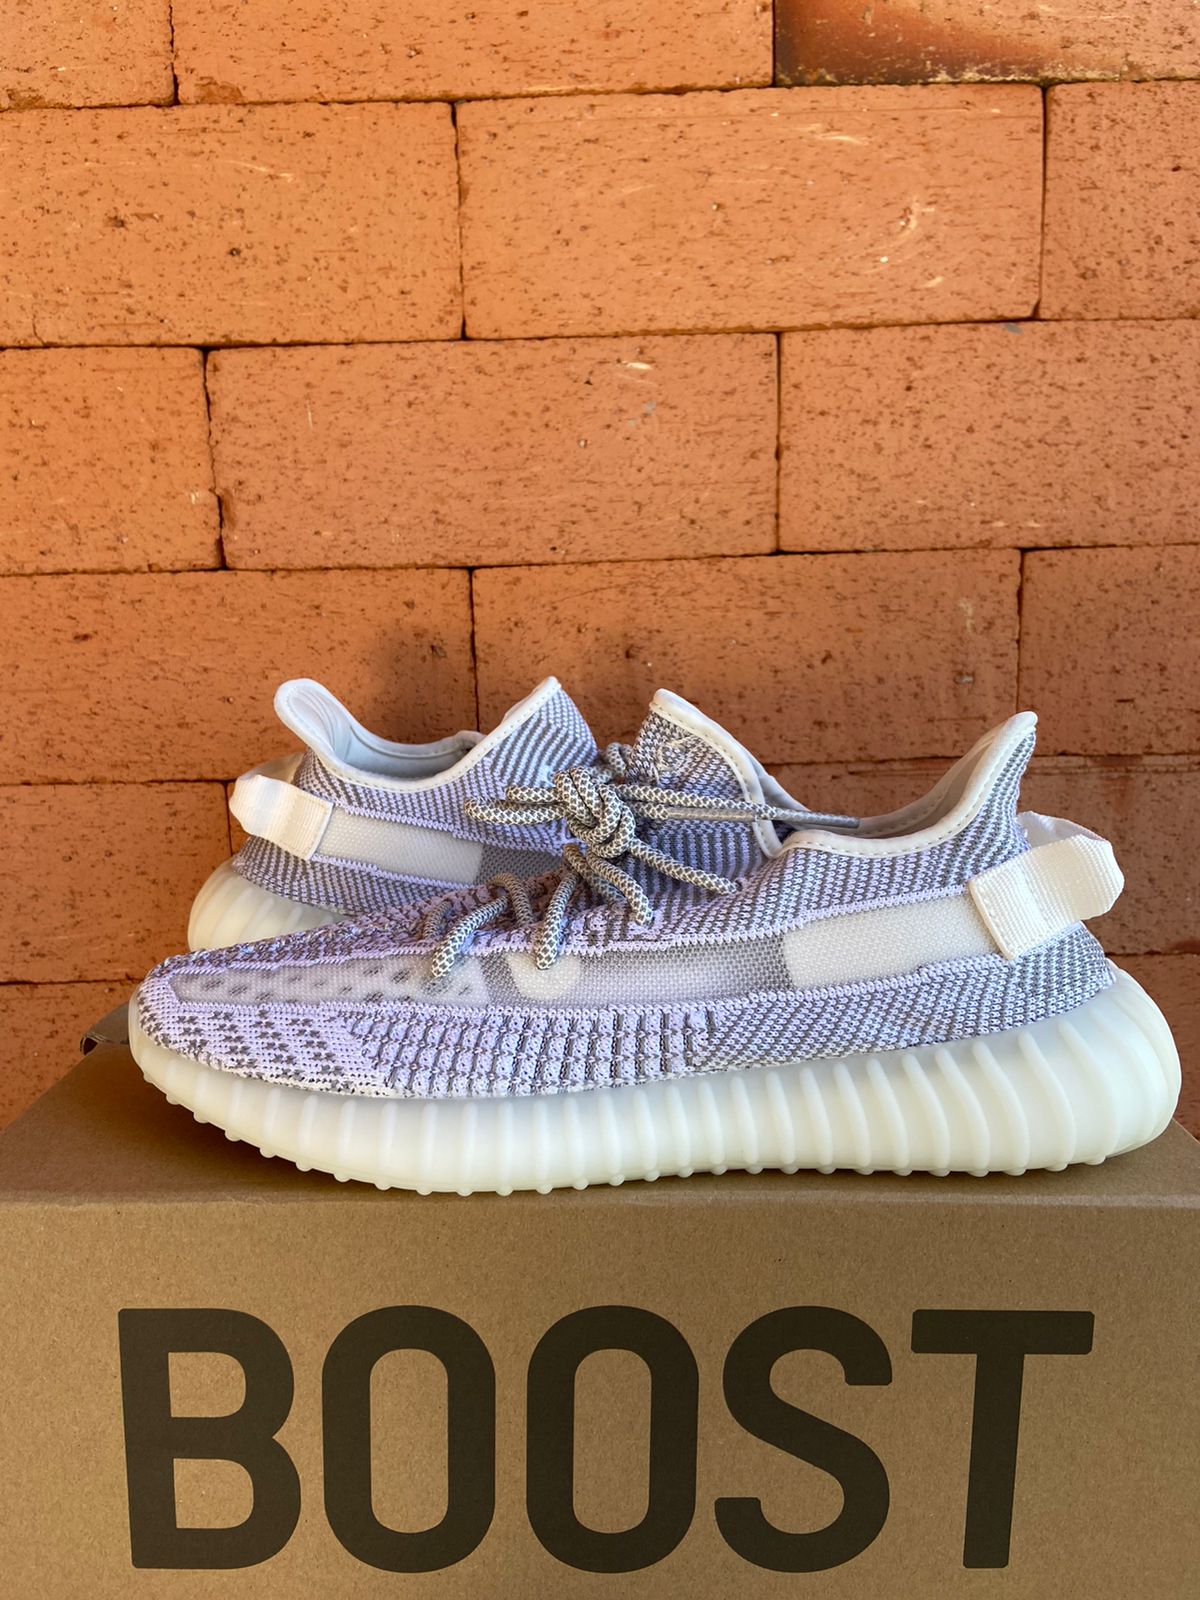 Yeezy 350 V2 Static Non-Reflective - Wave Sneakers